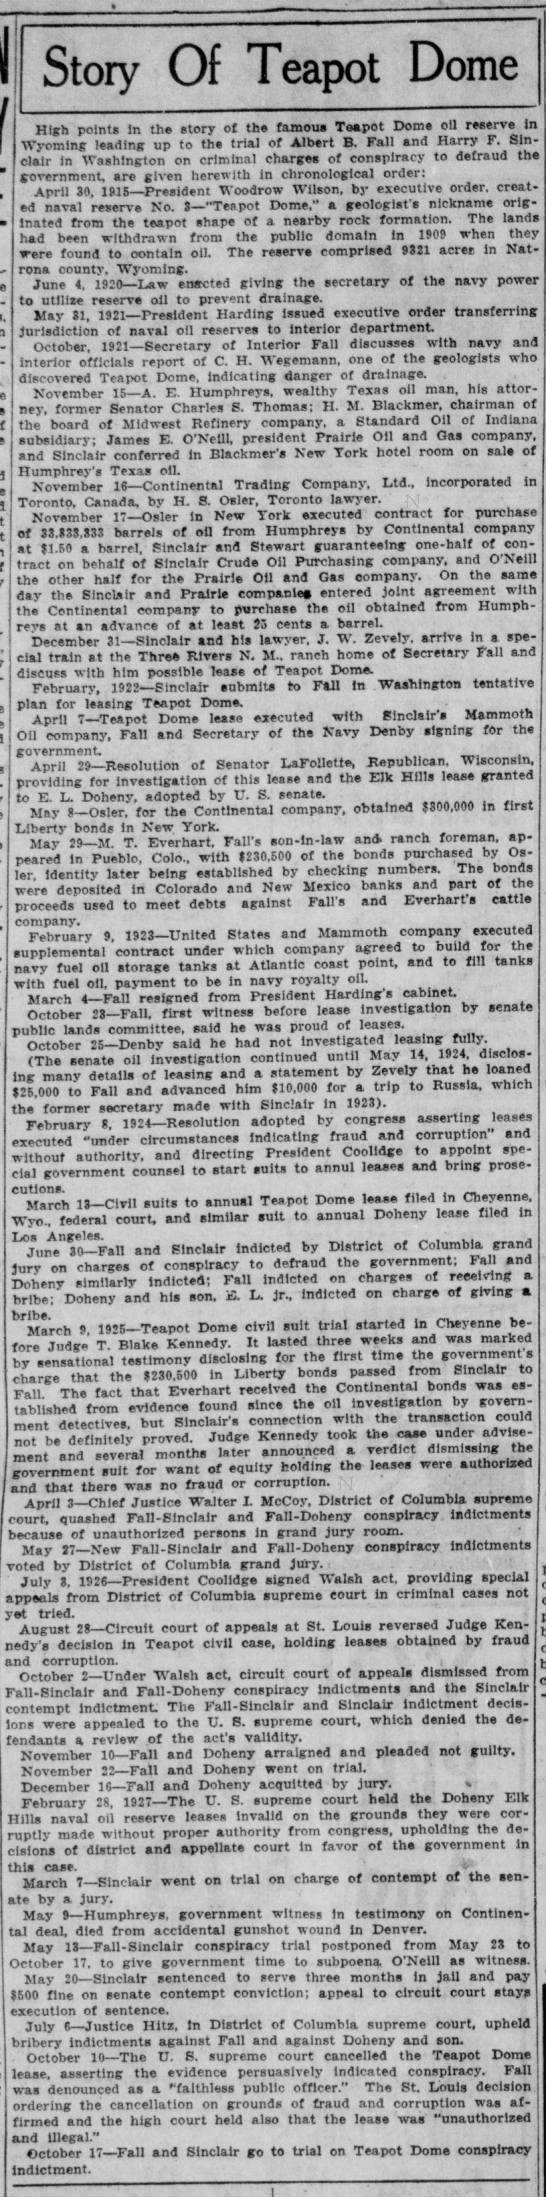 Time line of Teapot Dome scandal prior to Oct. 1927 - 